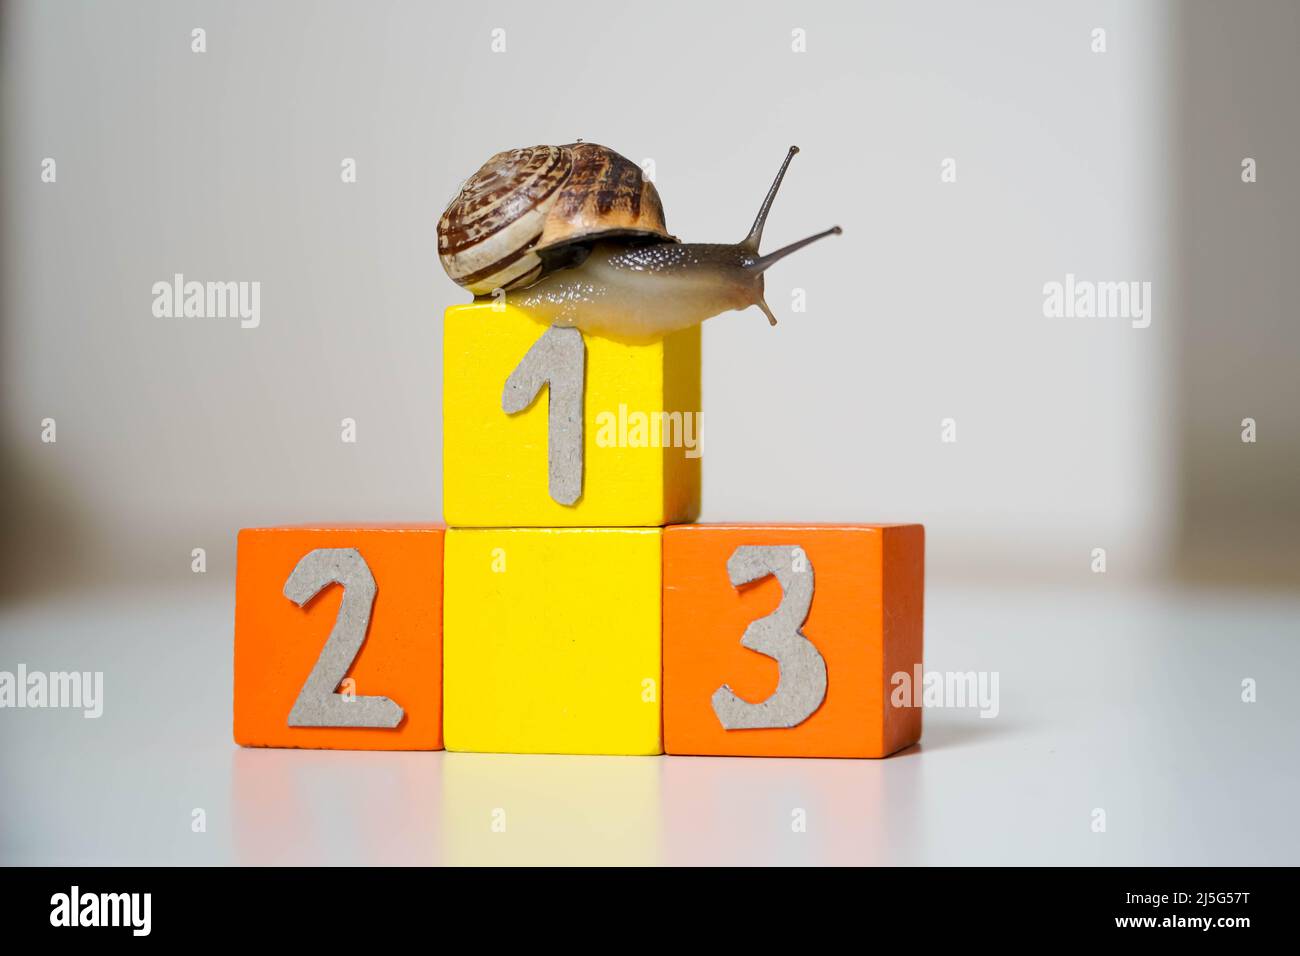 Snail in the first place of an Olympic podium. concept of success and everything is possible with effort Stock Photo